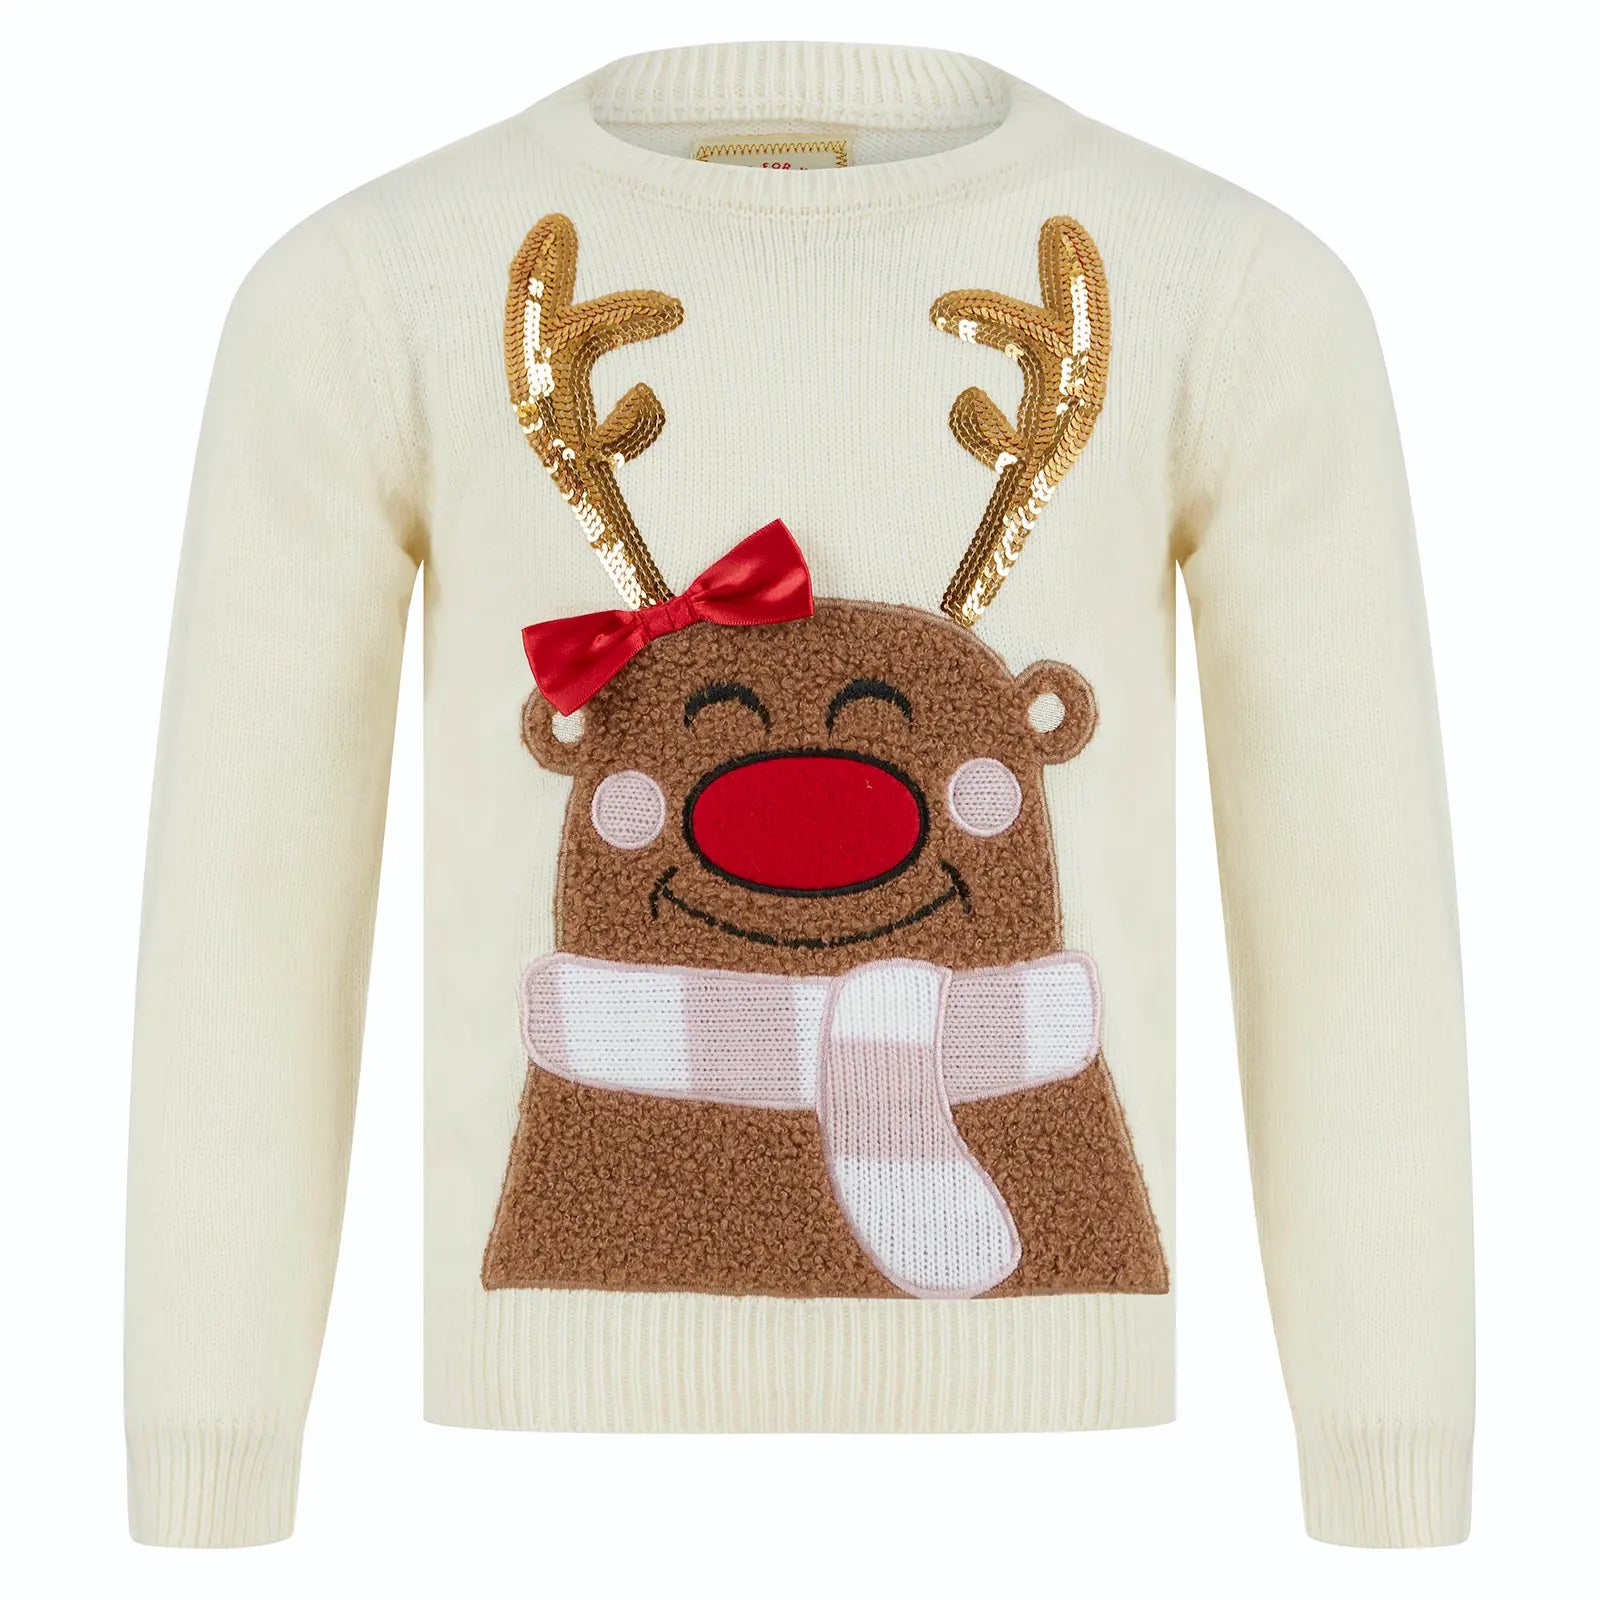 cream coloured christmas jumper featuring sweet reindeer character with gold sequin antlers, red christmas bow and large red nose